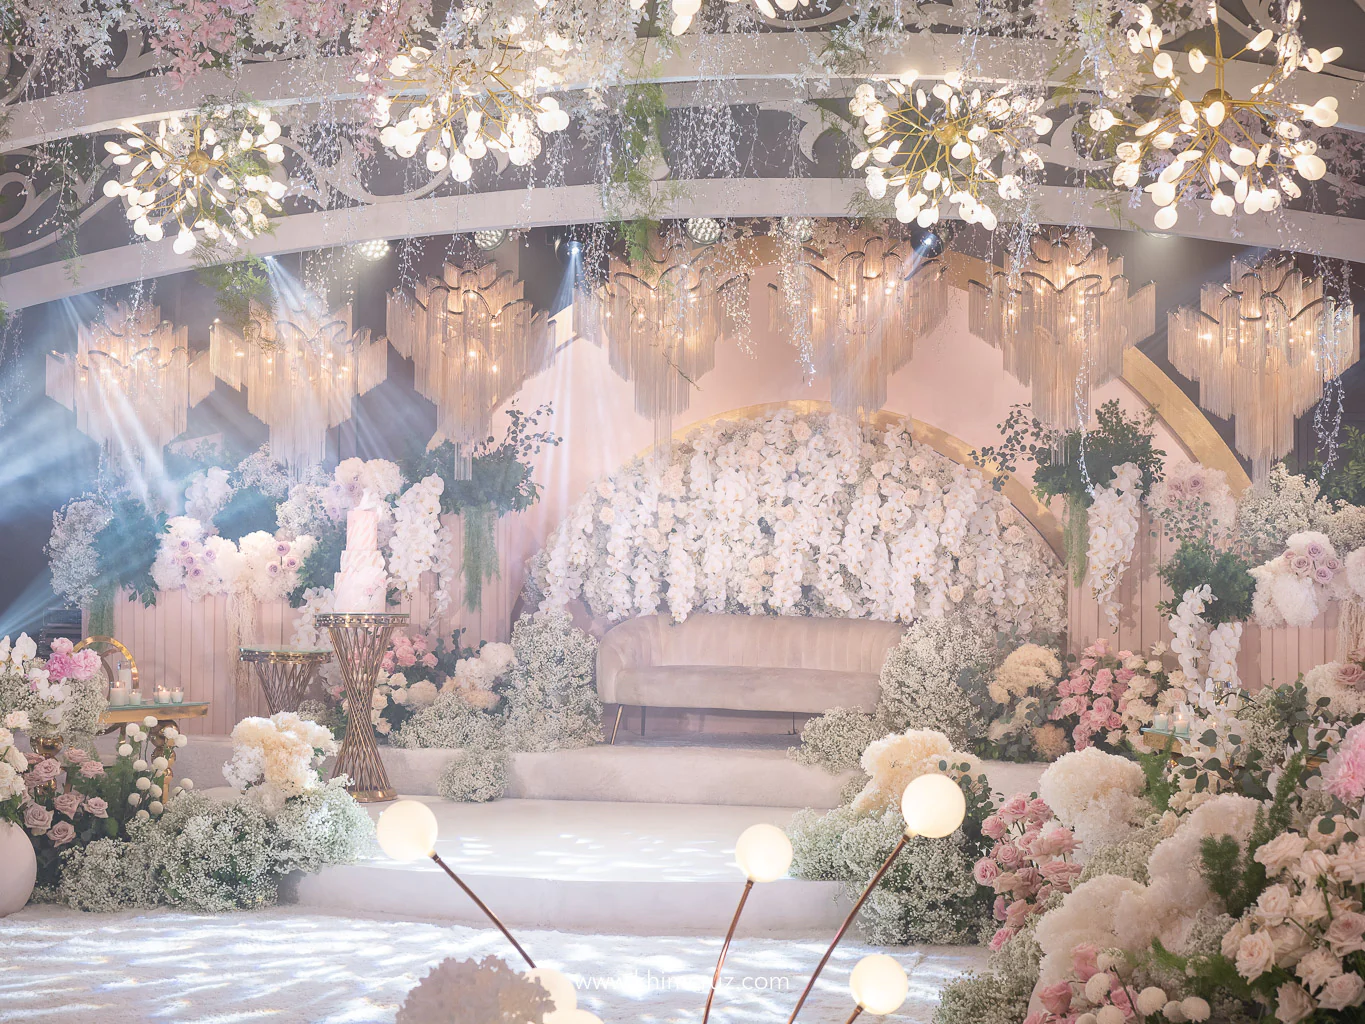 garden-inspired intimate wedding reception stage design with floral works for a Nikah ceremony